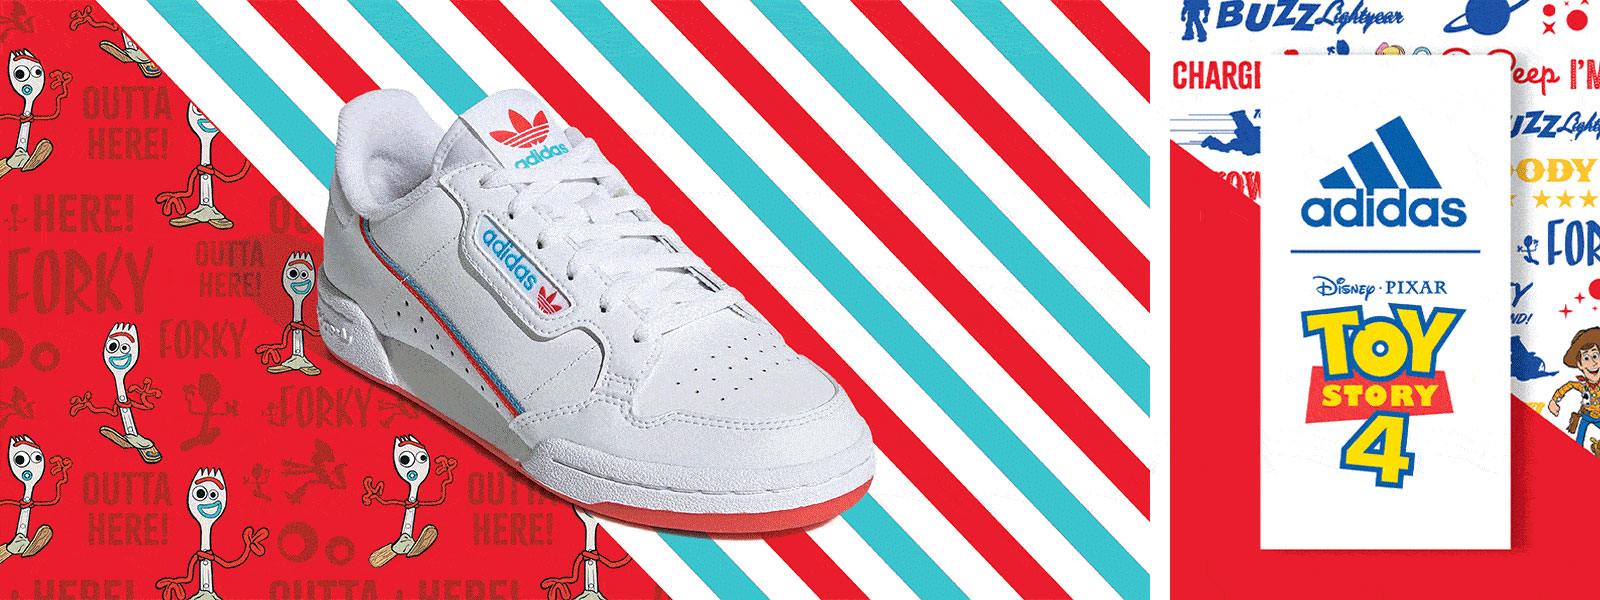 forky-toy-story-4-adidas-continental-80-shoe